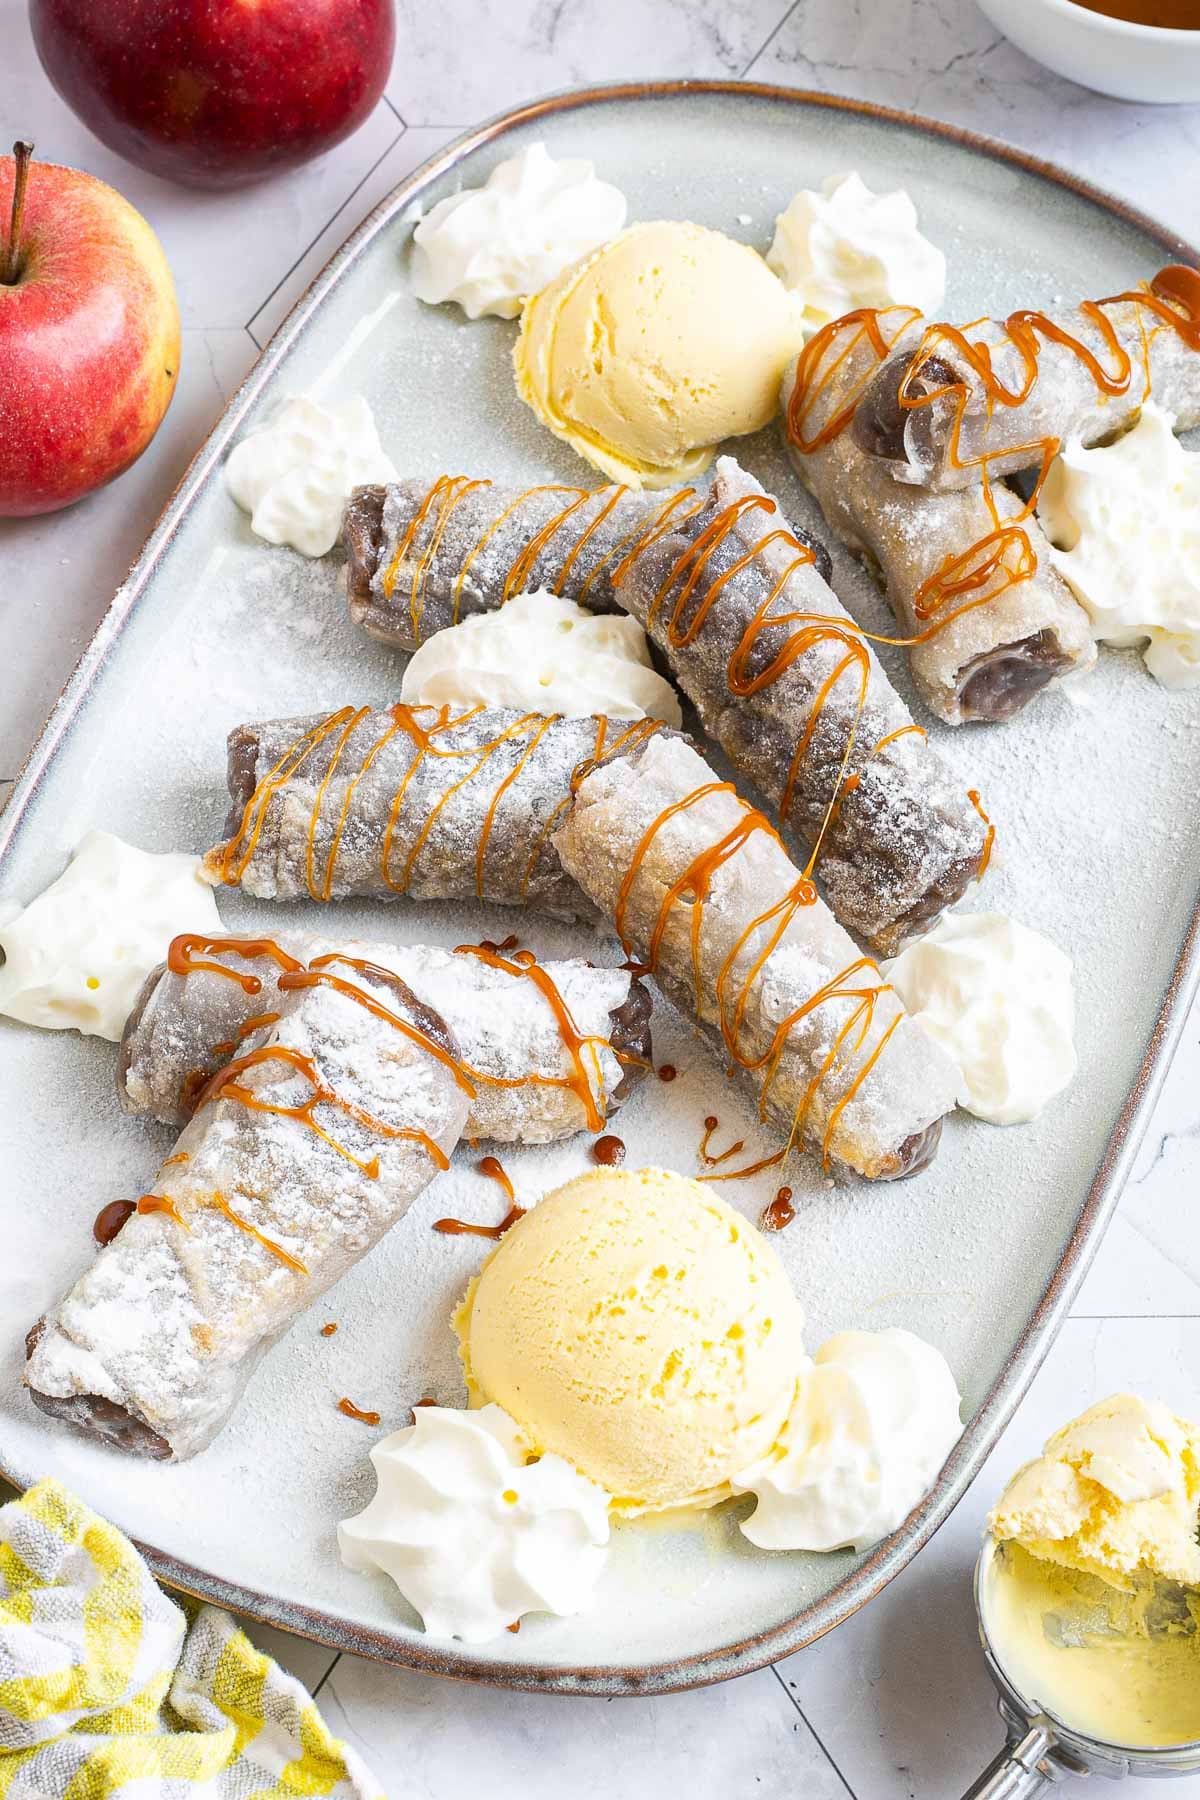 Rice paper rolls with brown filling placed on a light blue plate. Dusted with powdered sugar. Served with scoops of vanilla ice cream, caramel drizzle, and heaps of whipped cream.